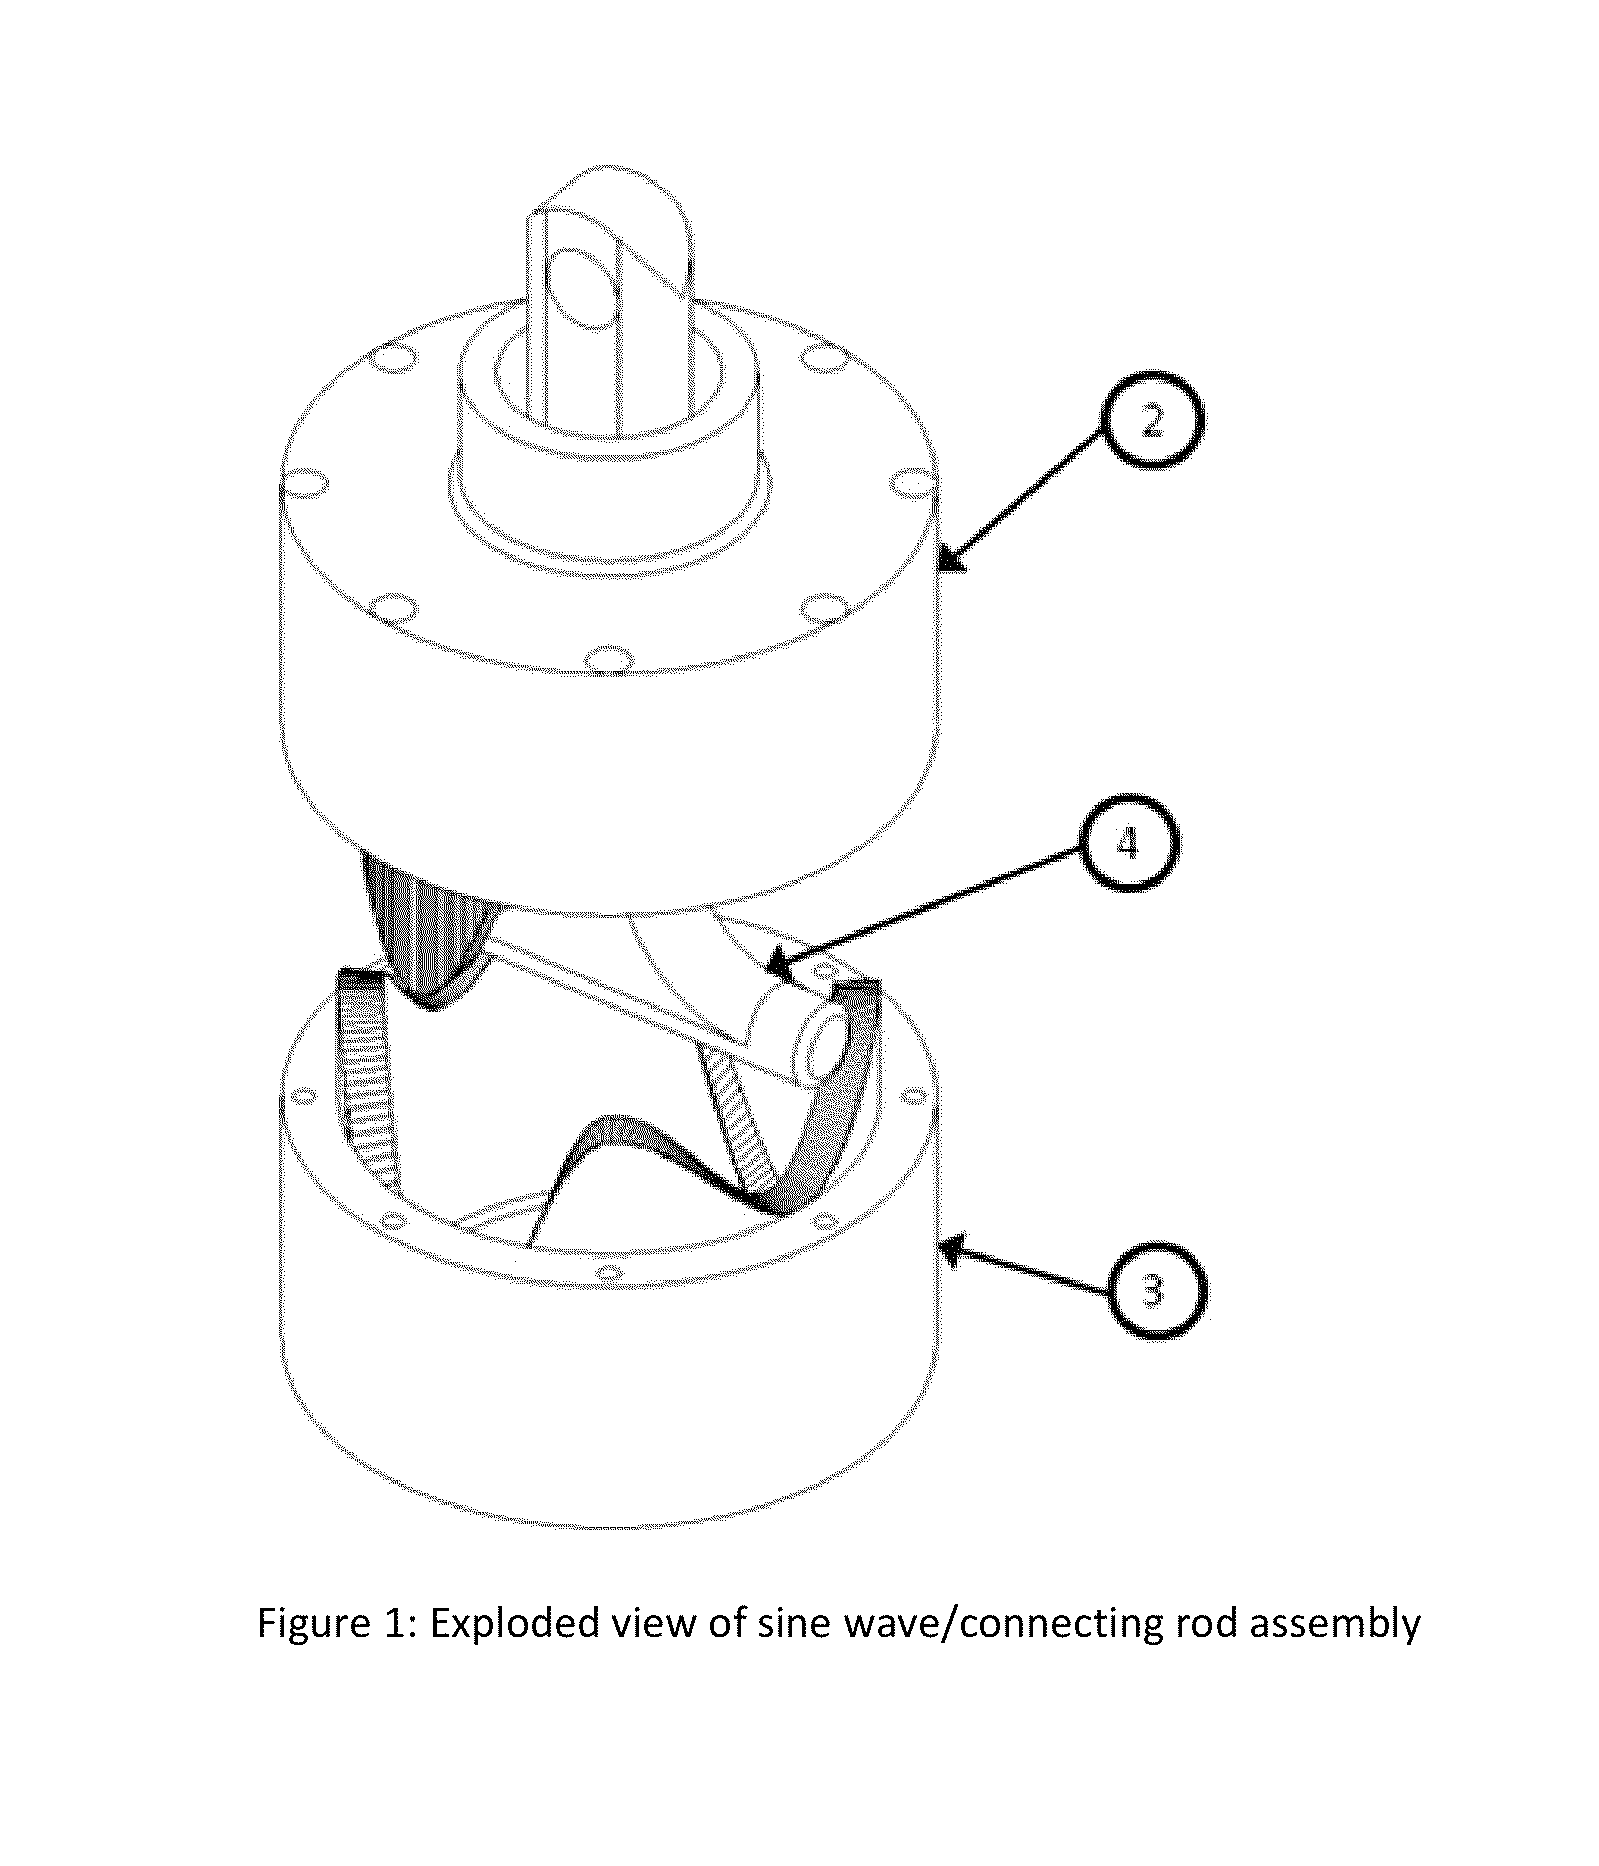 Axial piston internal combustion engine using an Atkinson cycle